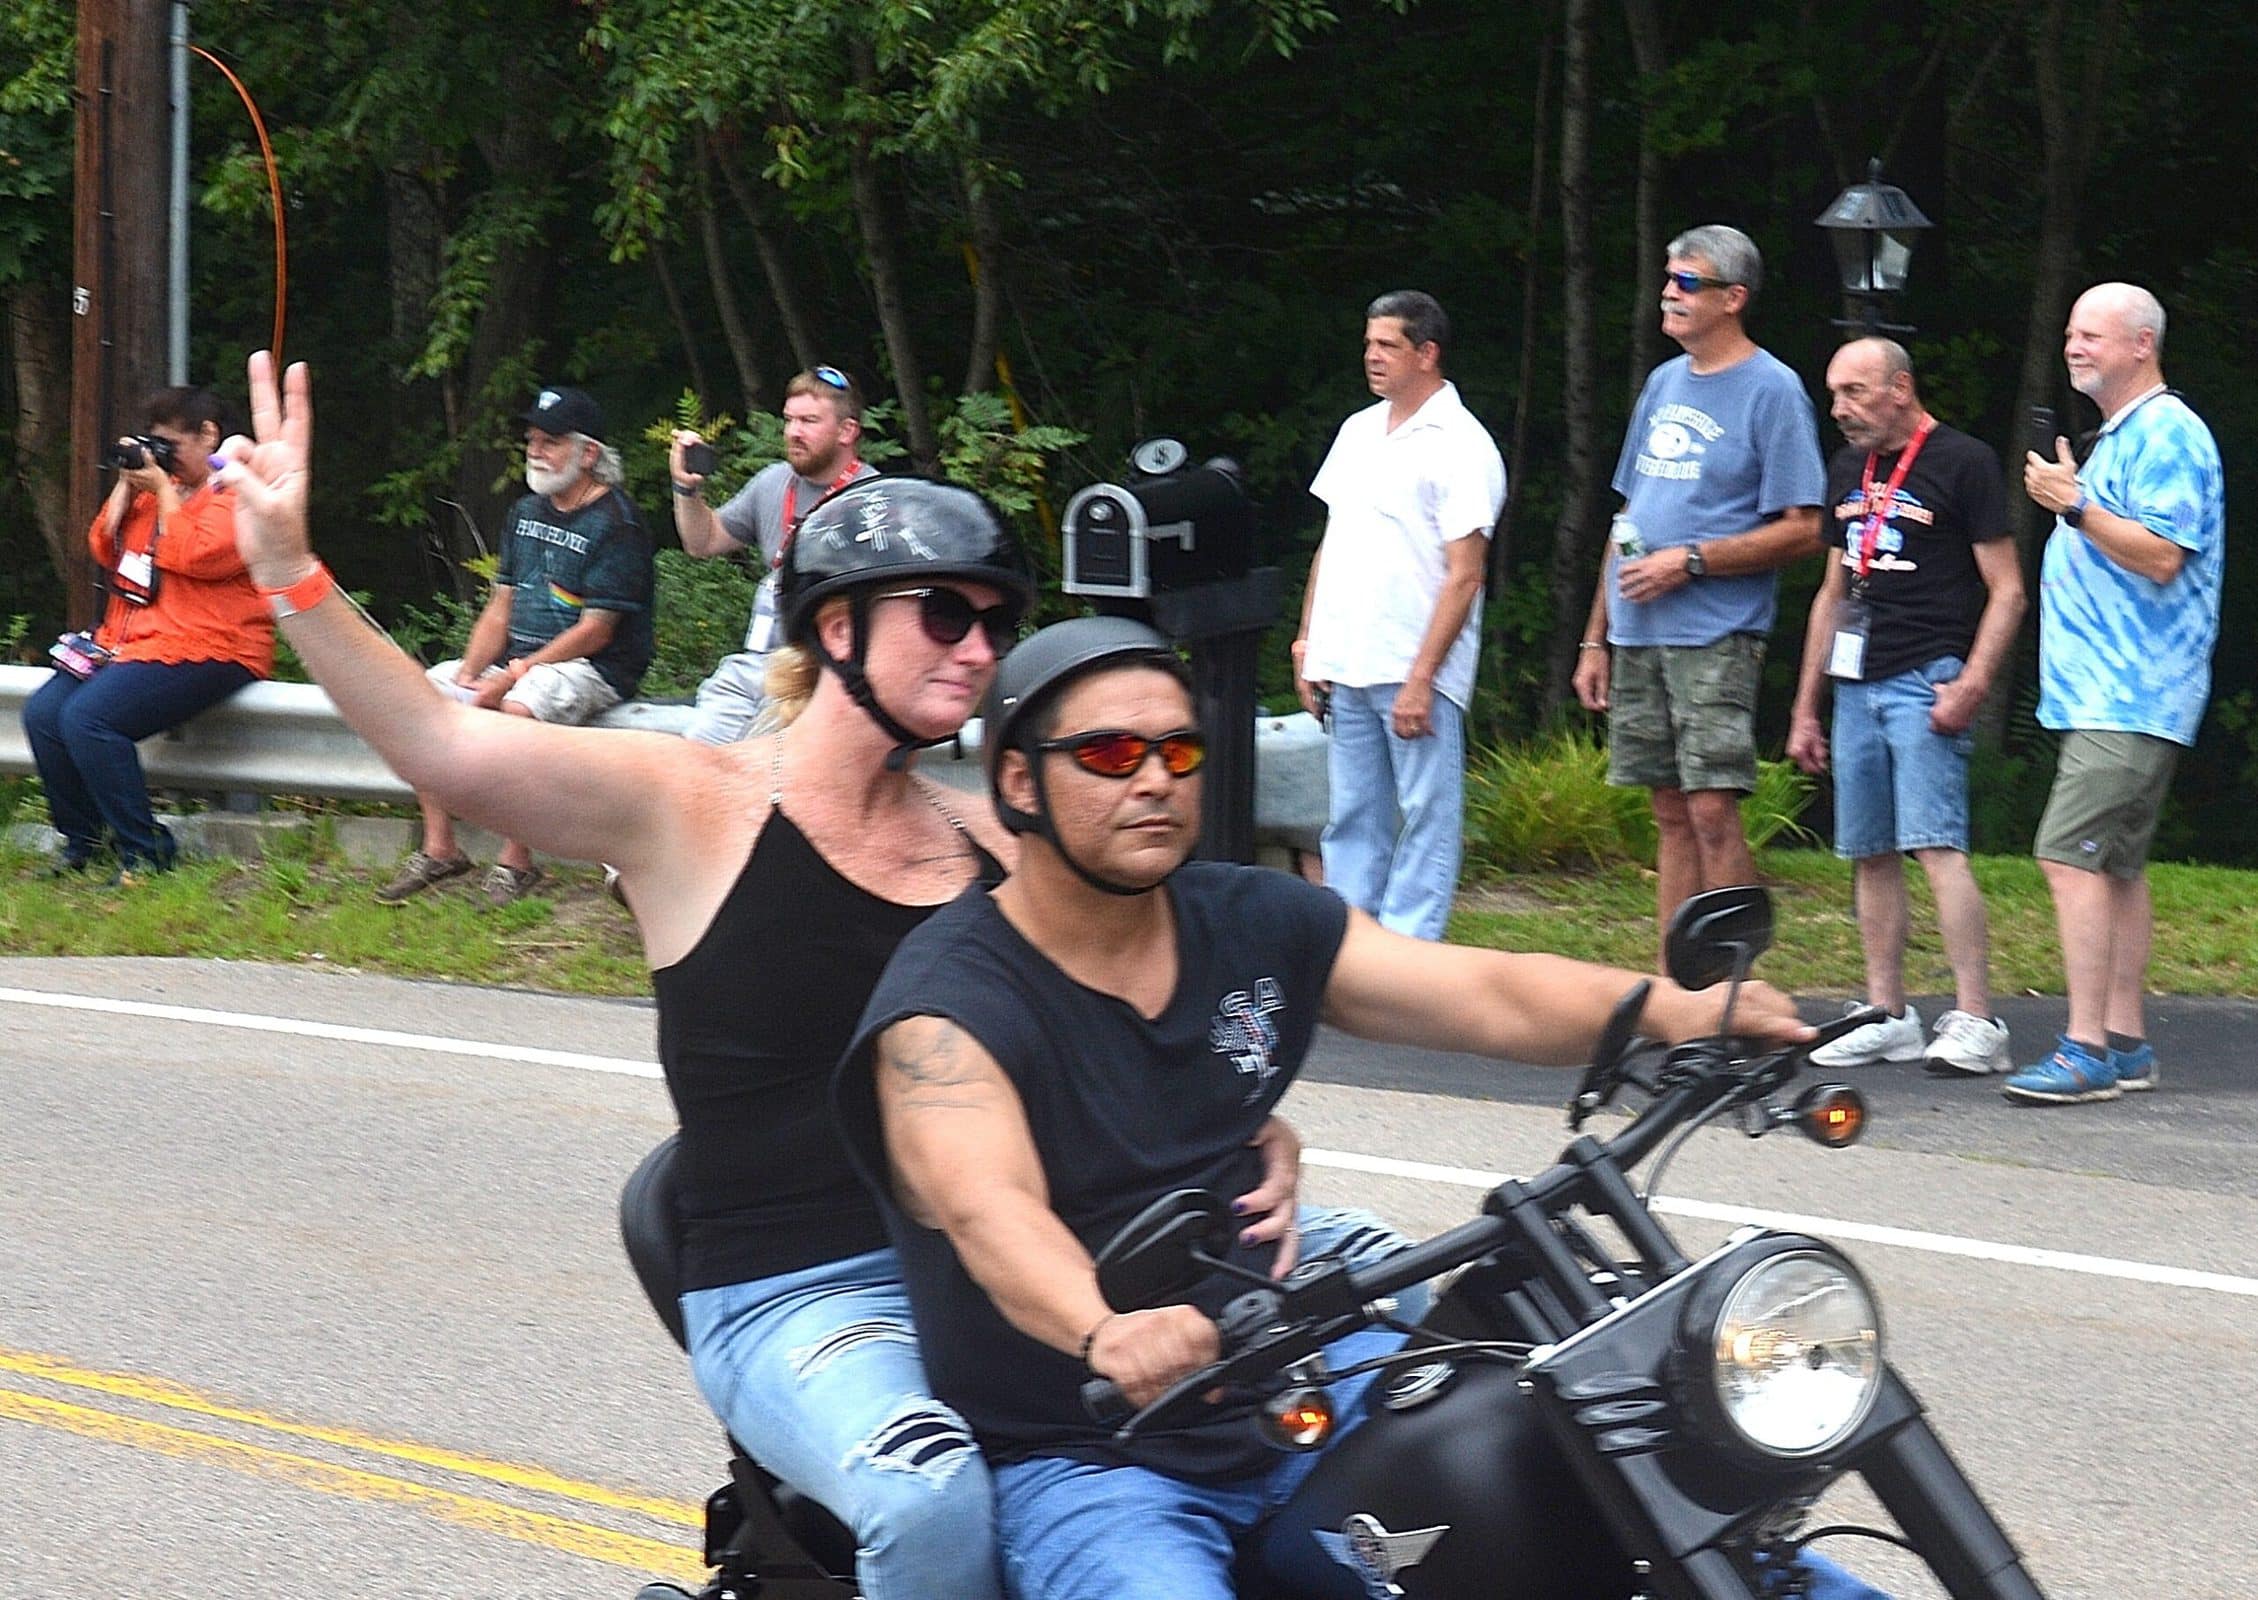 Loyal supporters welcome the return of the SJL Memorial Ride